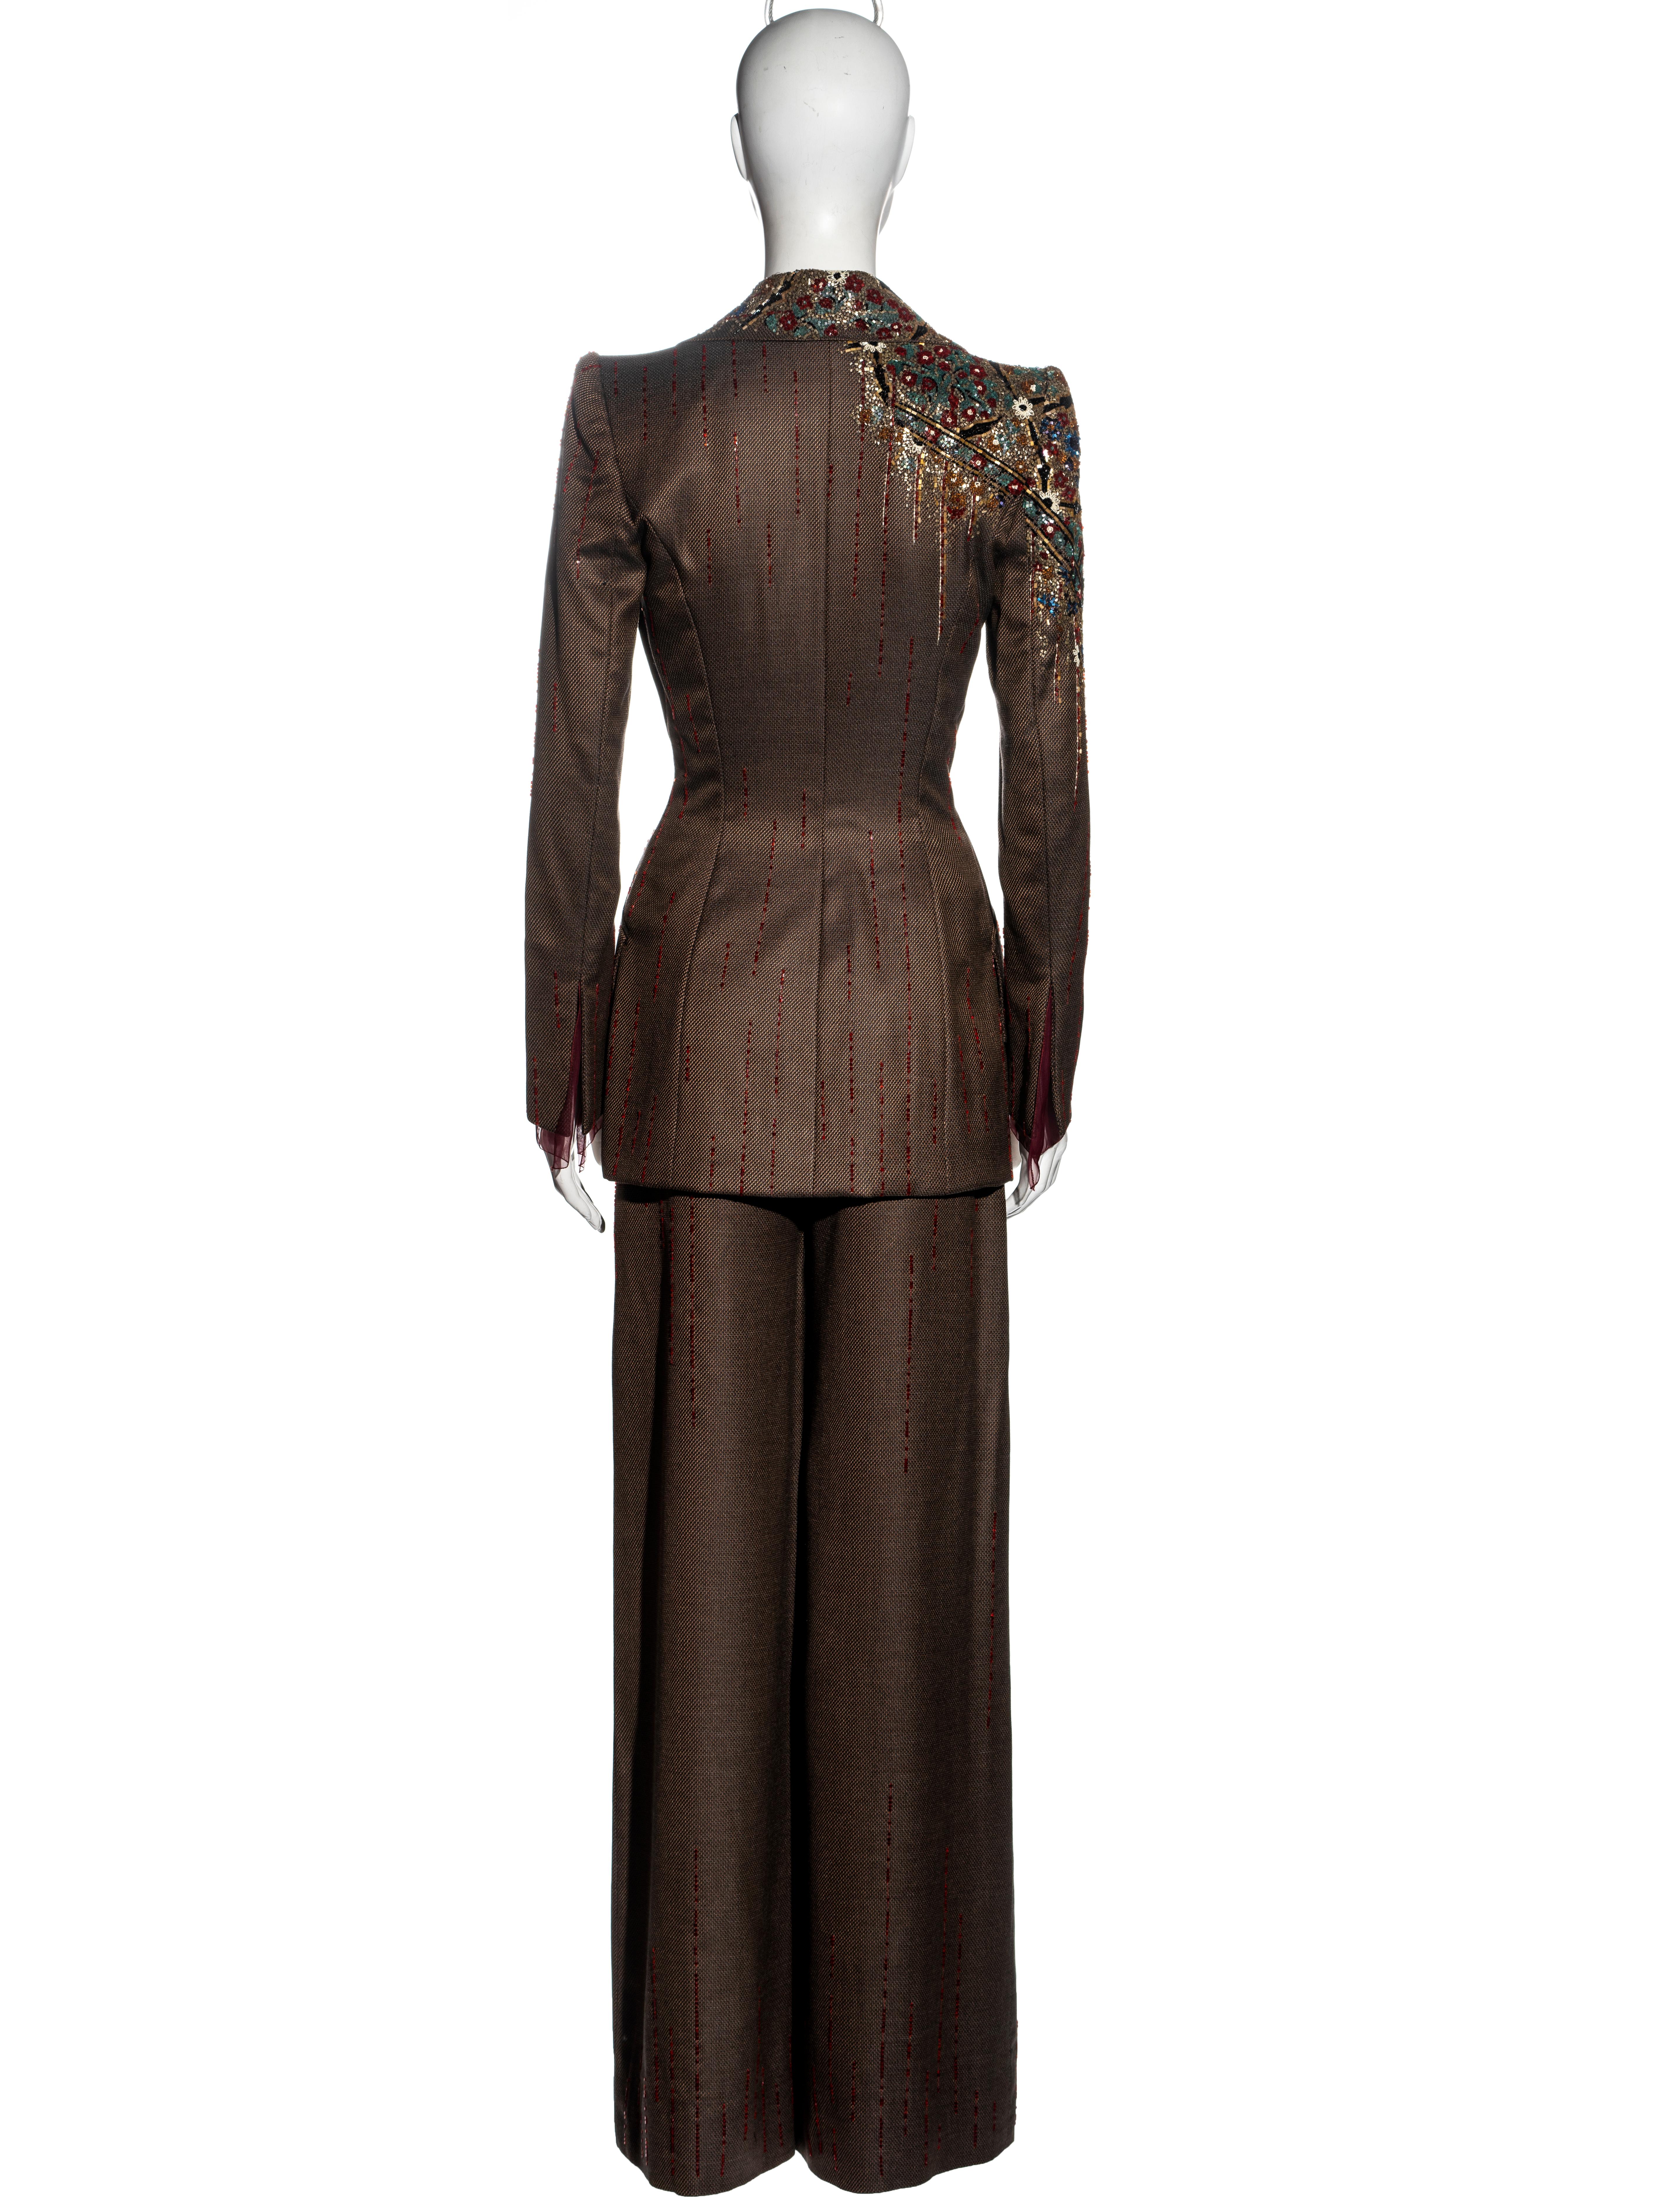 Jean-Louis Scherrer Haute Couture embellished brown wool pant suit, fw 2001 For Sale 6